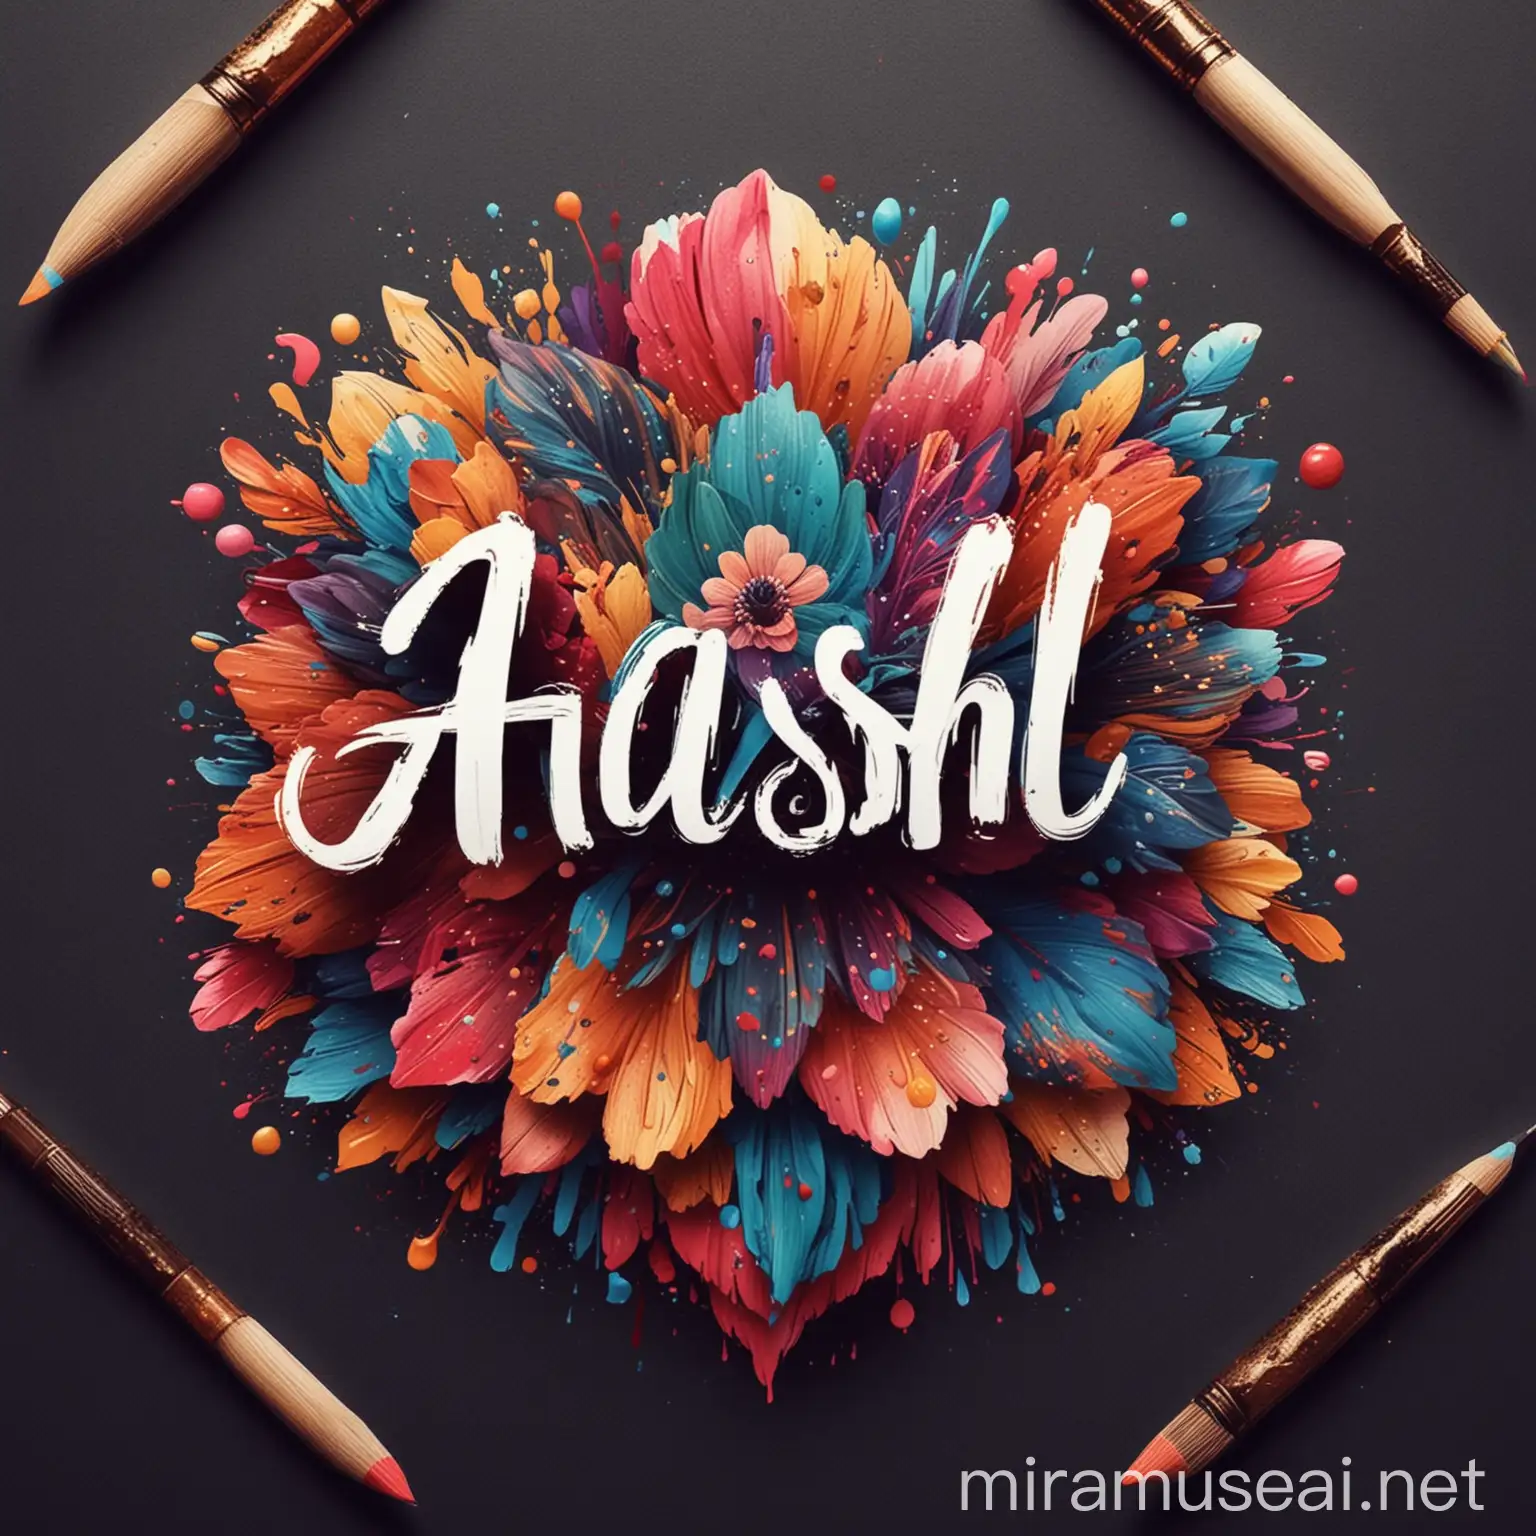 Create a logo for an Instagram artist named Aashi. The design should reflect creativity and artistic flair, suitable for an Instagram profile picture. Incorporate elements that signify art such as paintbrushes, palettes, or abstract artistic patterns. Use vibrant colors that stand out and convey a sense of creativity and originality. The name "Aashi" should be prominently featured in an elegant and stylish font that complements the artistic theme. The overall design should be modern, eye-catching, and professional, fitting perfectly within the Instagram profile picture dimensions.